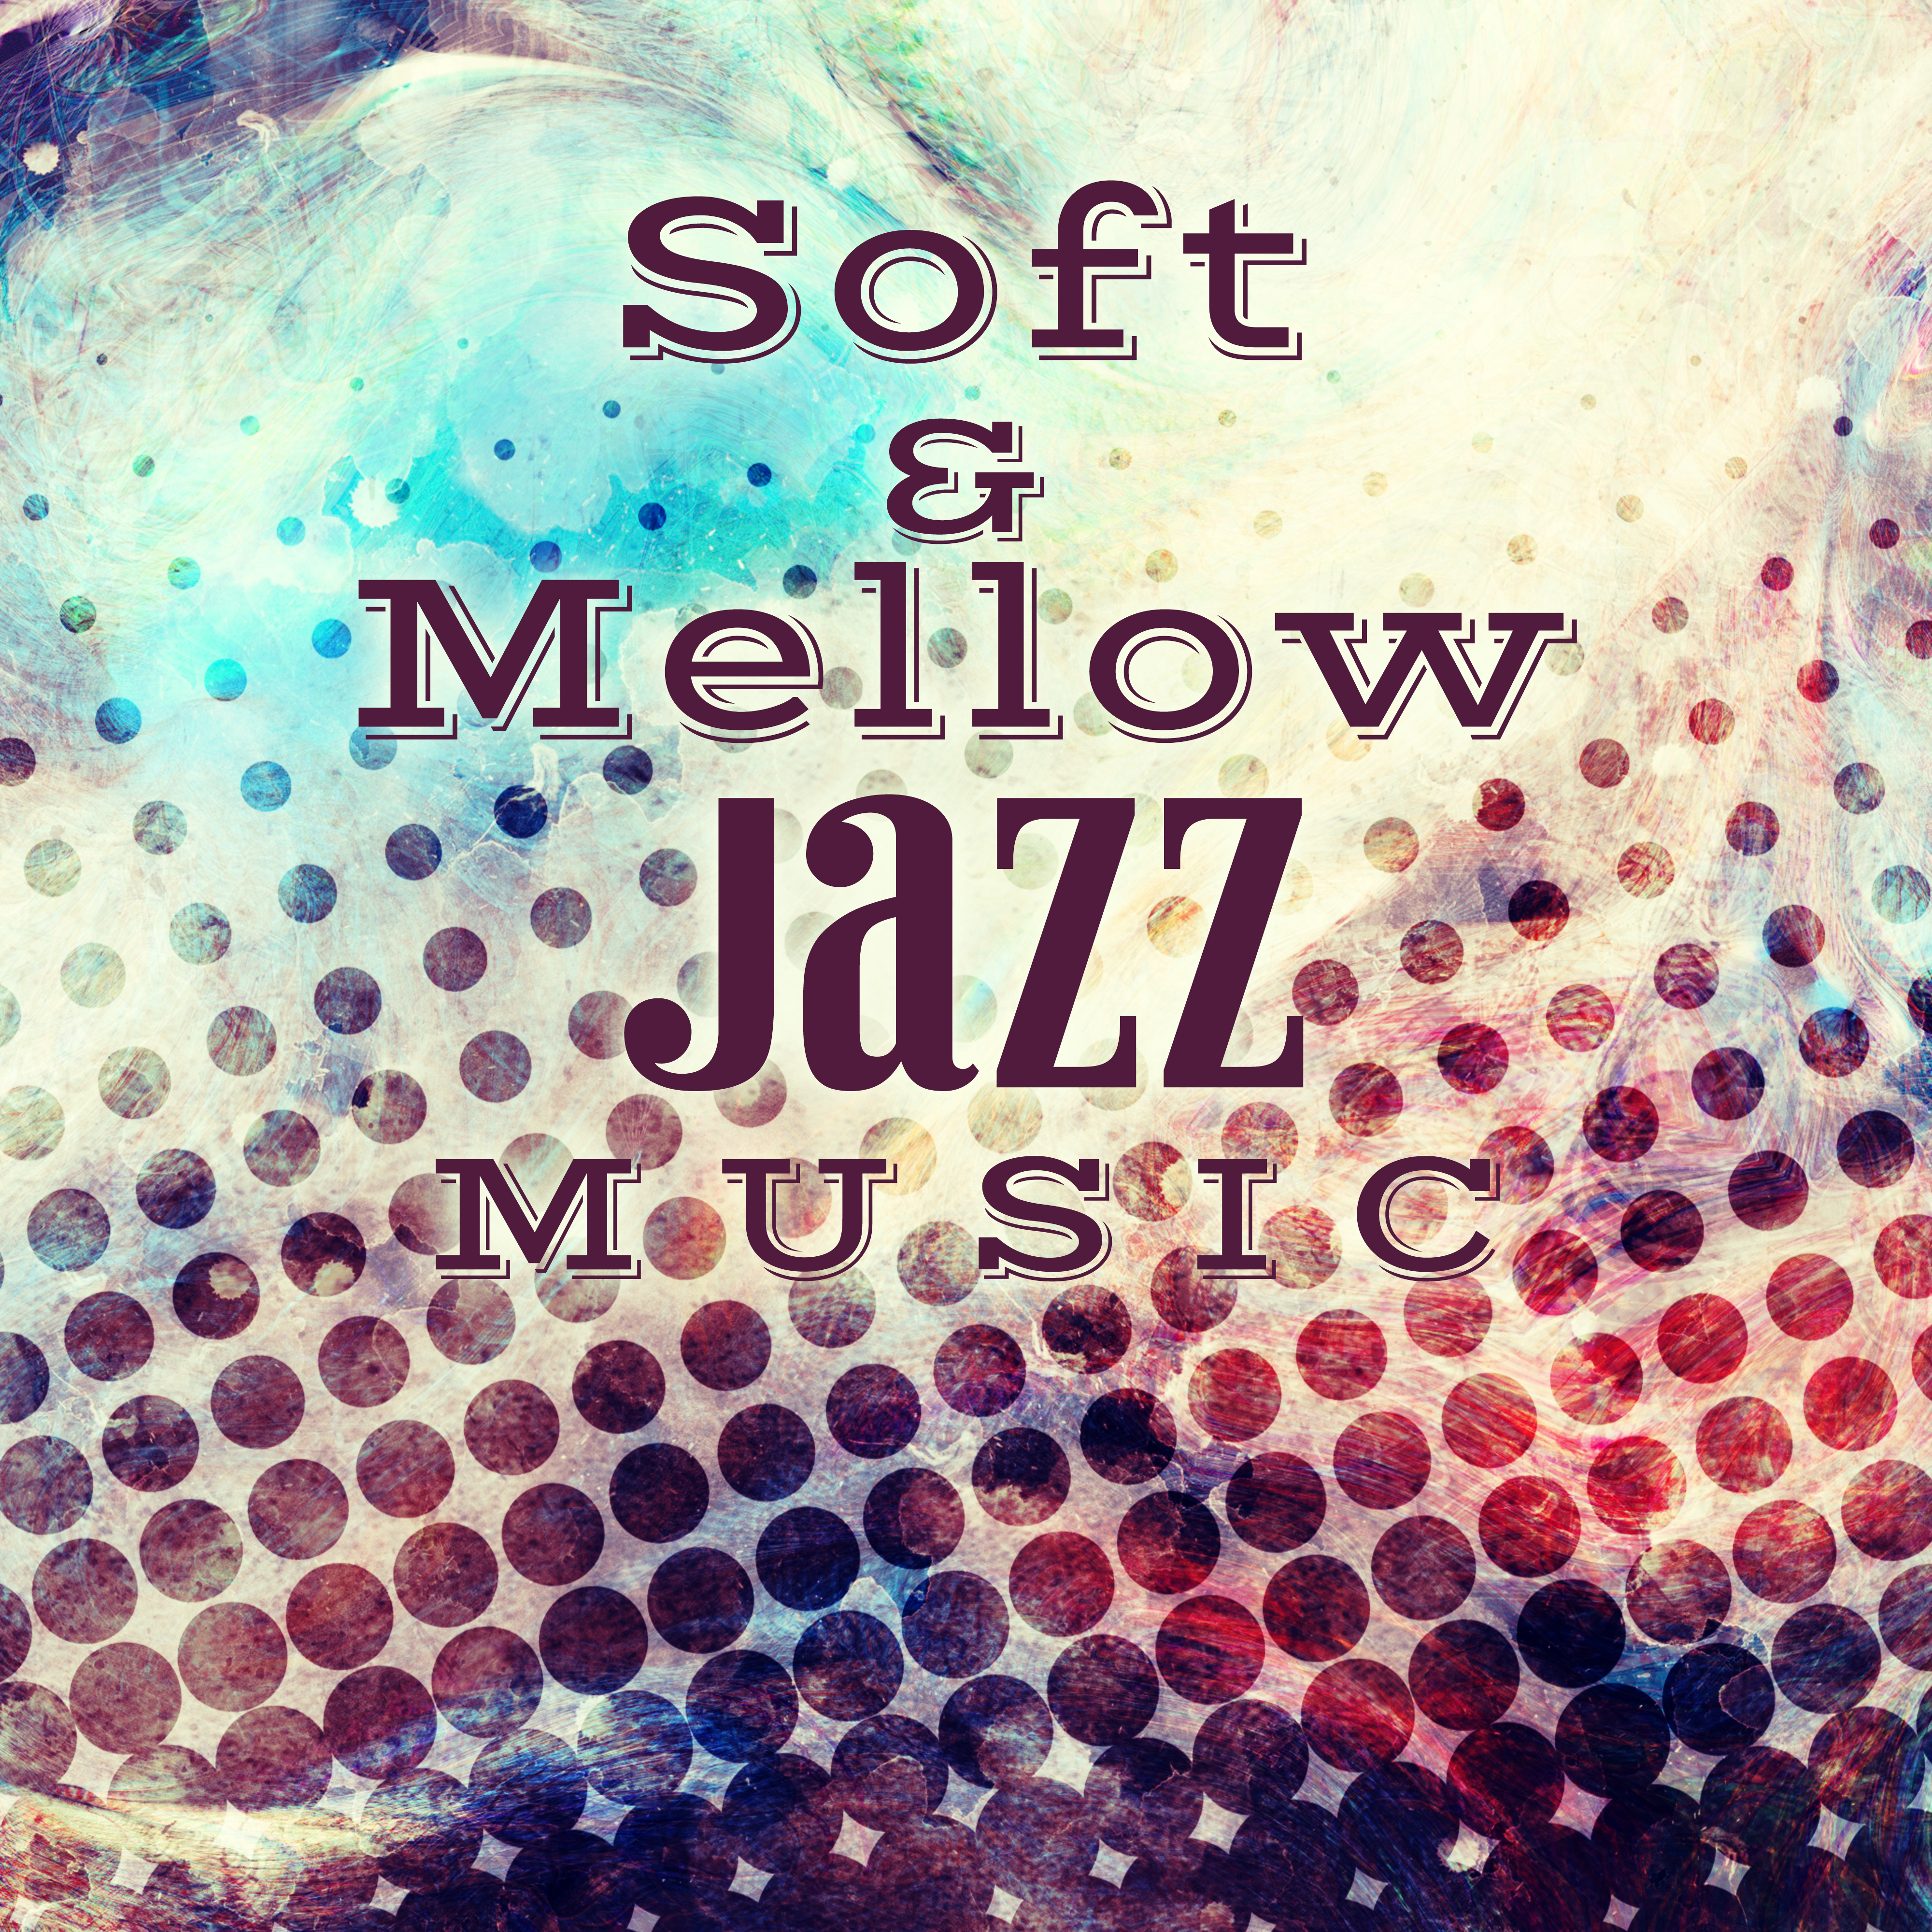 Soft  Mellow Jazz Music  Calm Down  Relax, Easy Listening, Peaceful Music, Jazz to Rest